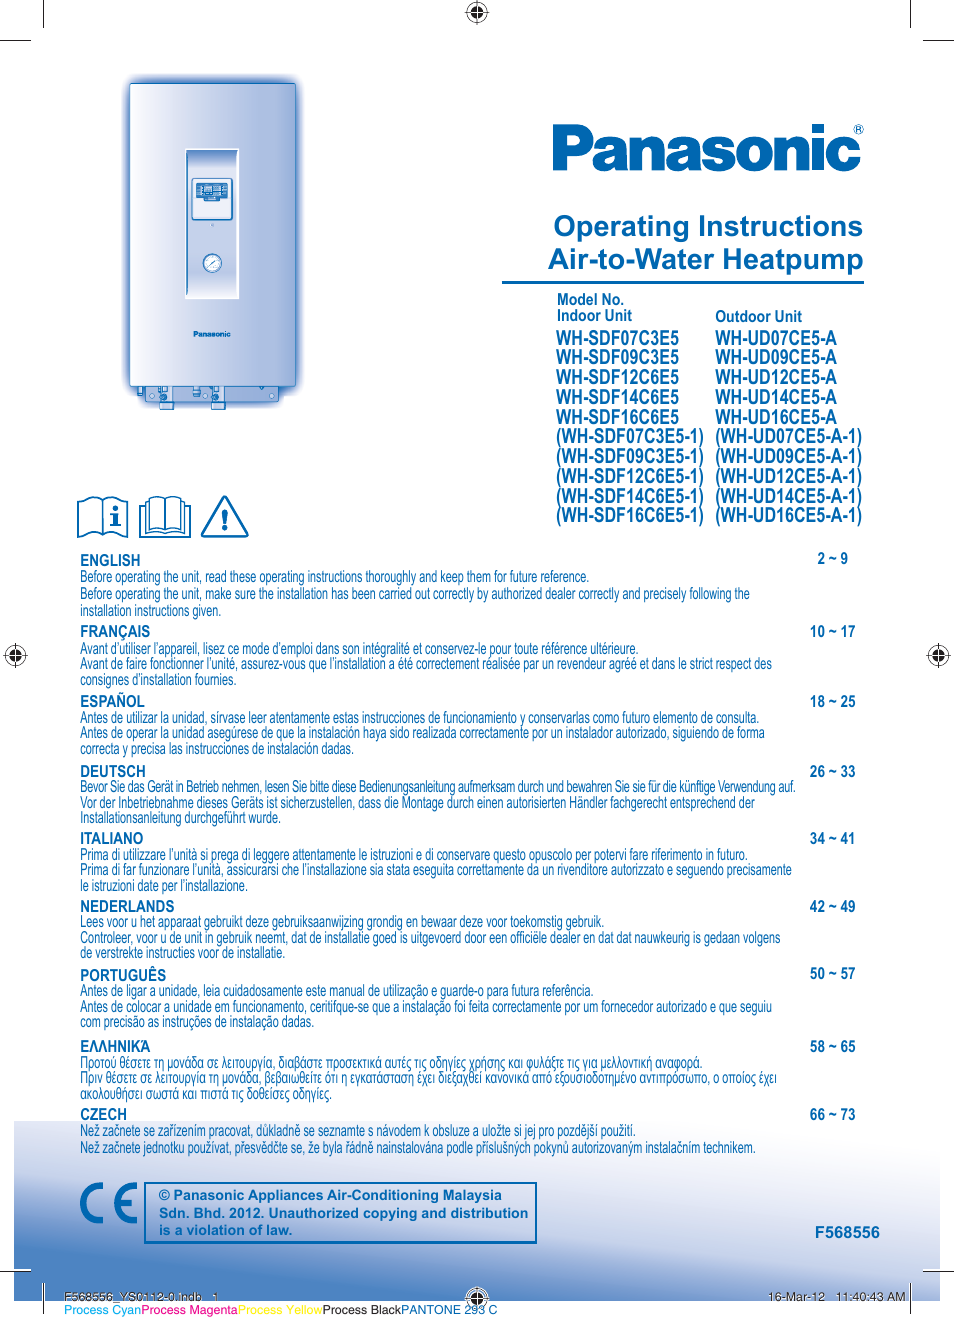 Panasonic WHUD07CE5A1 User Manual | 76 pages